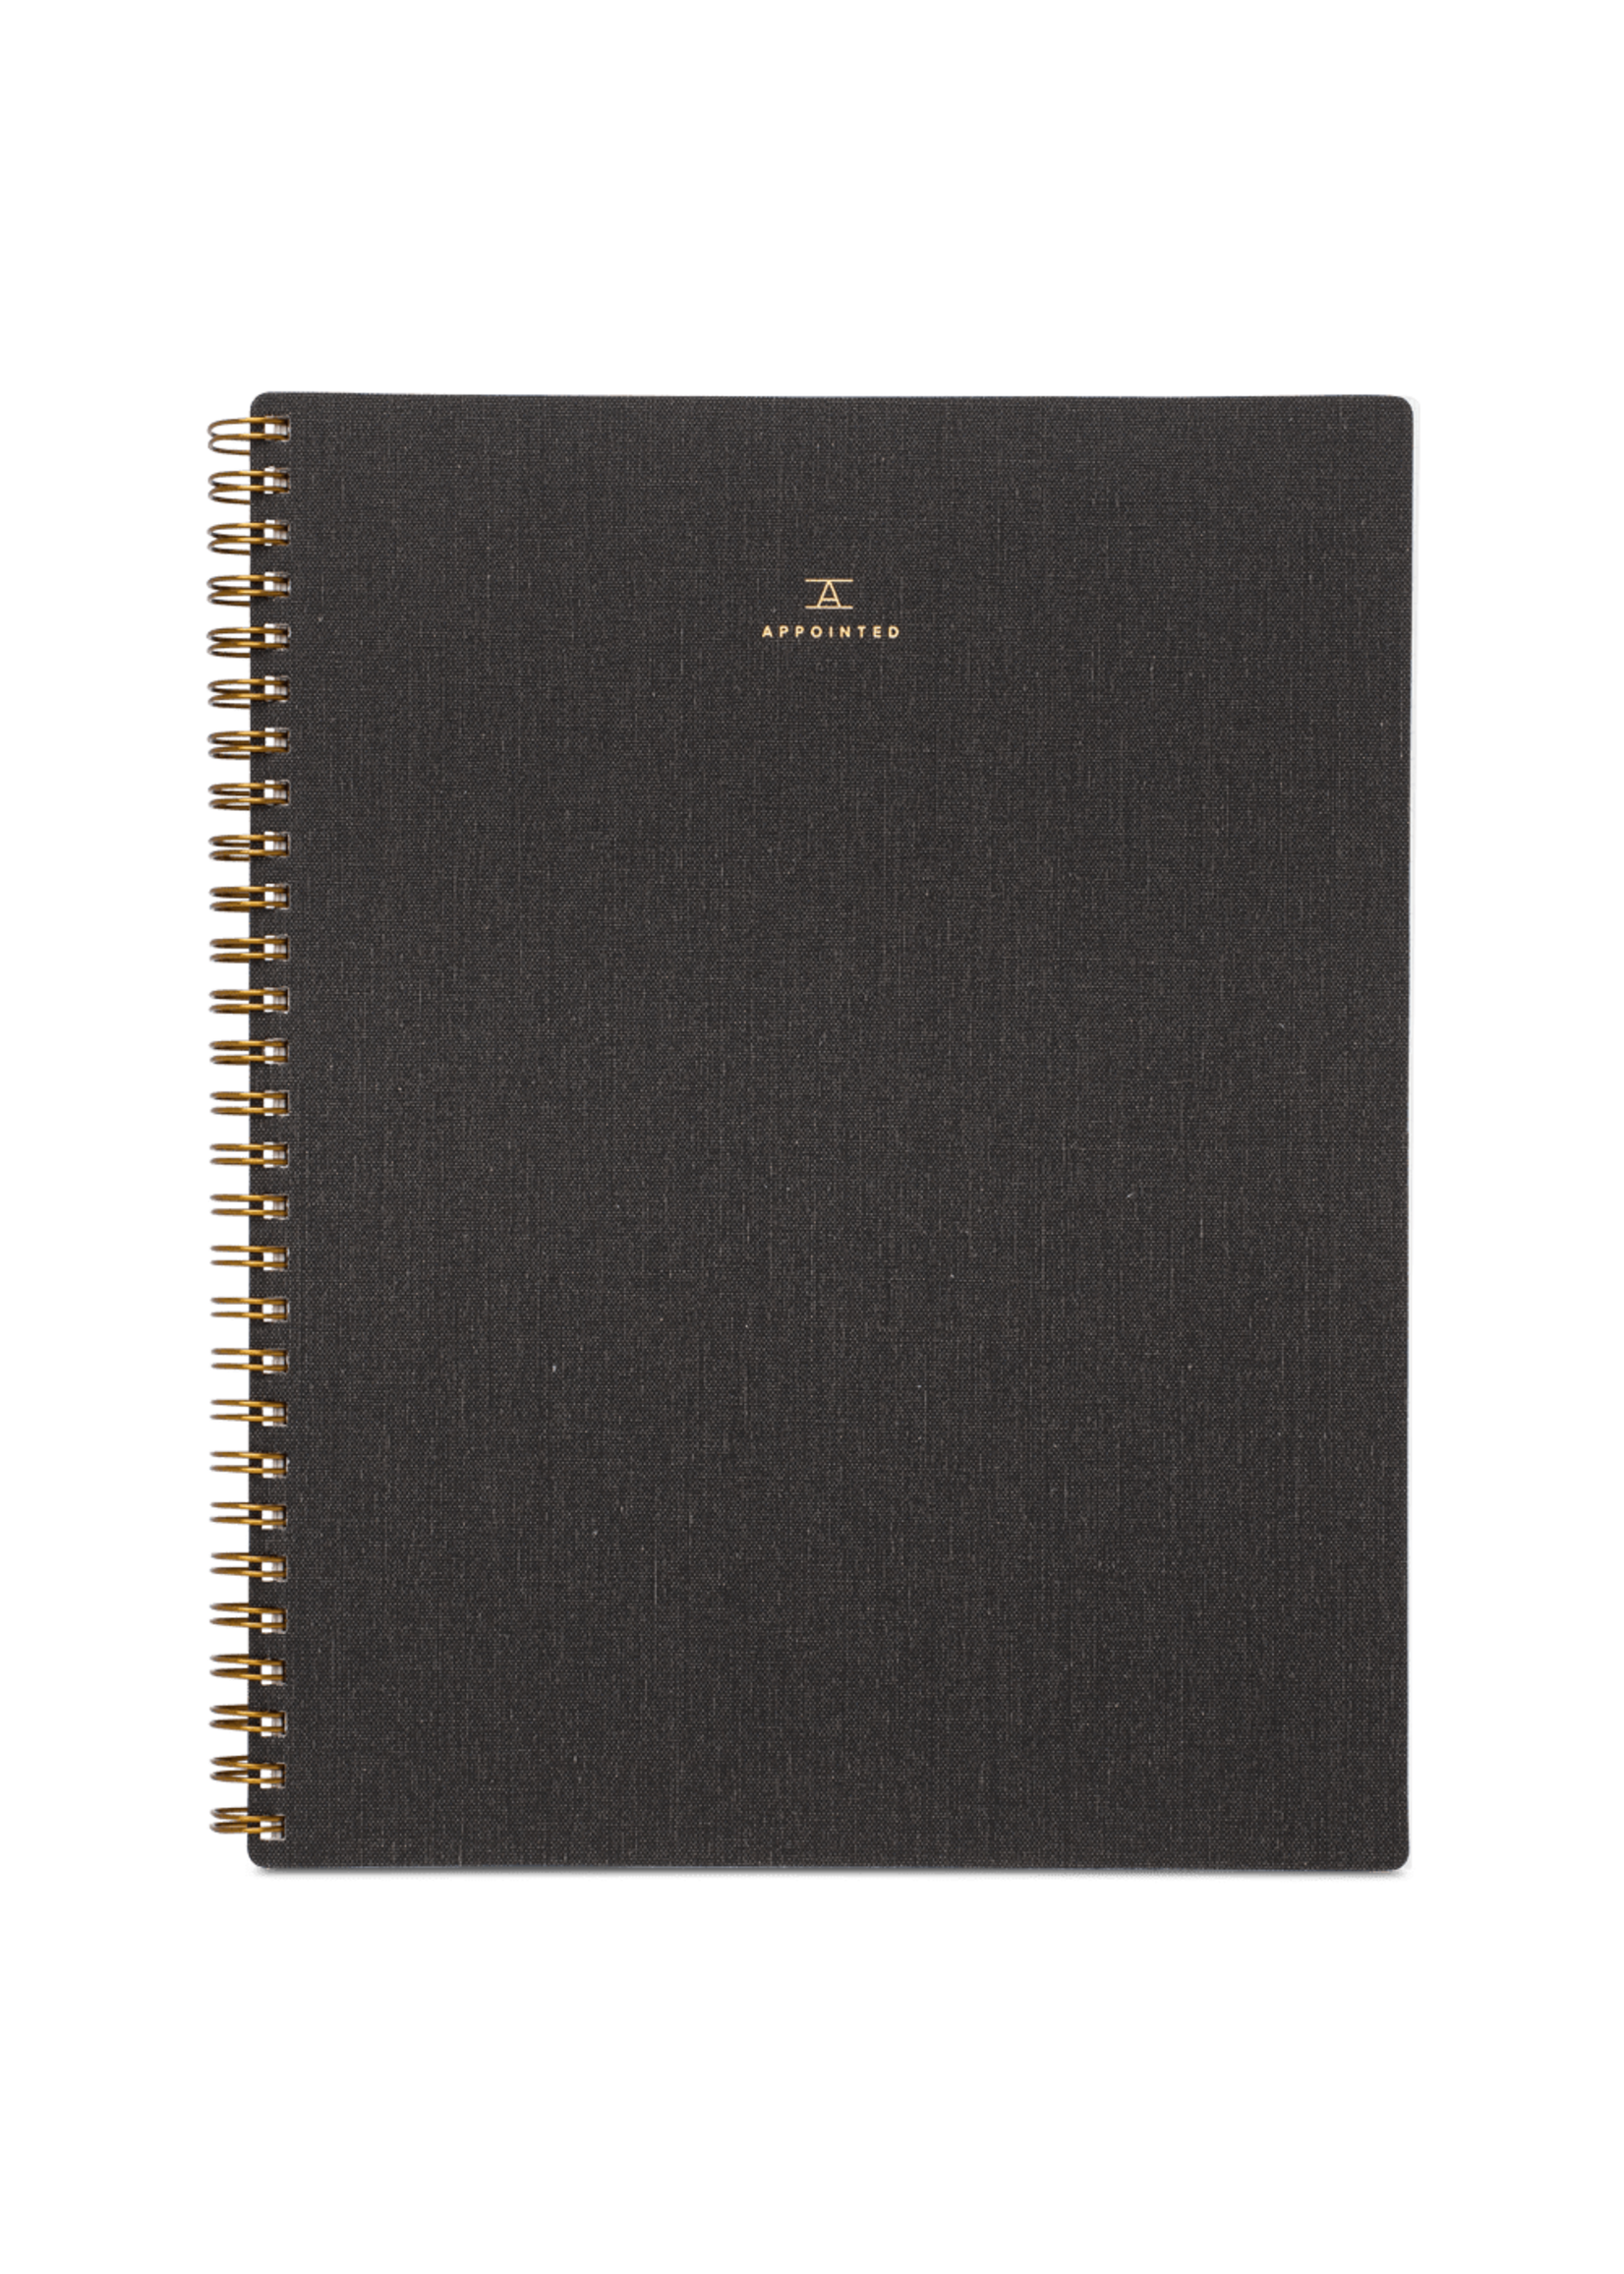 Appointed Lined Notebook - Charcoal Gray